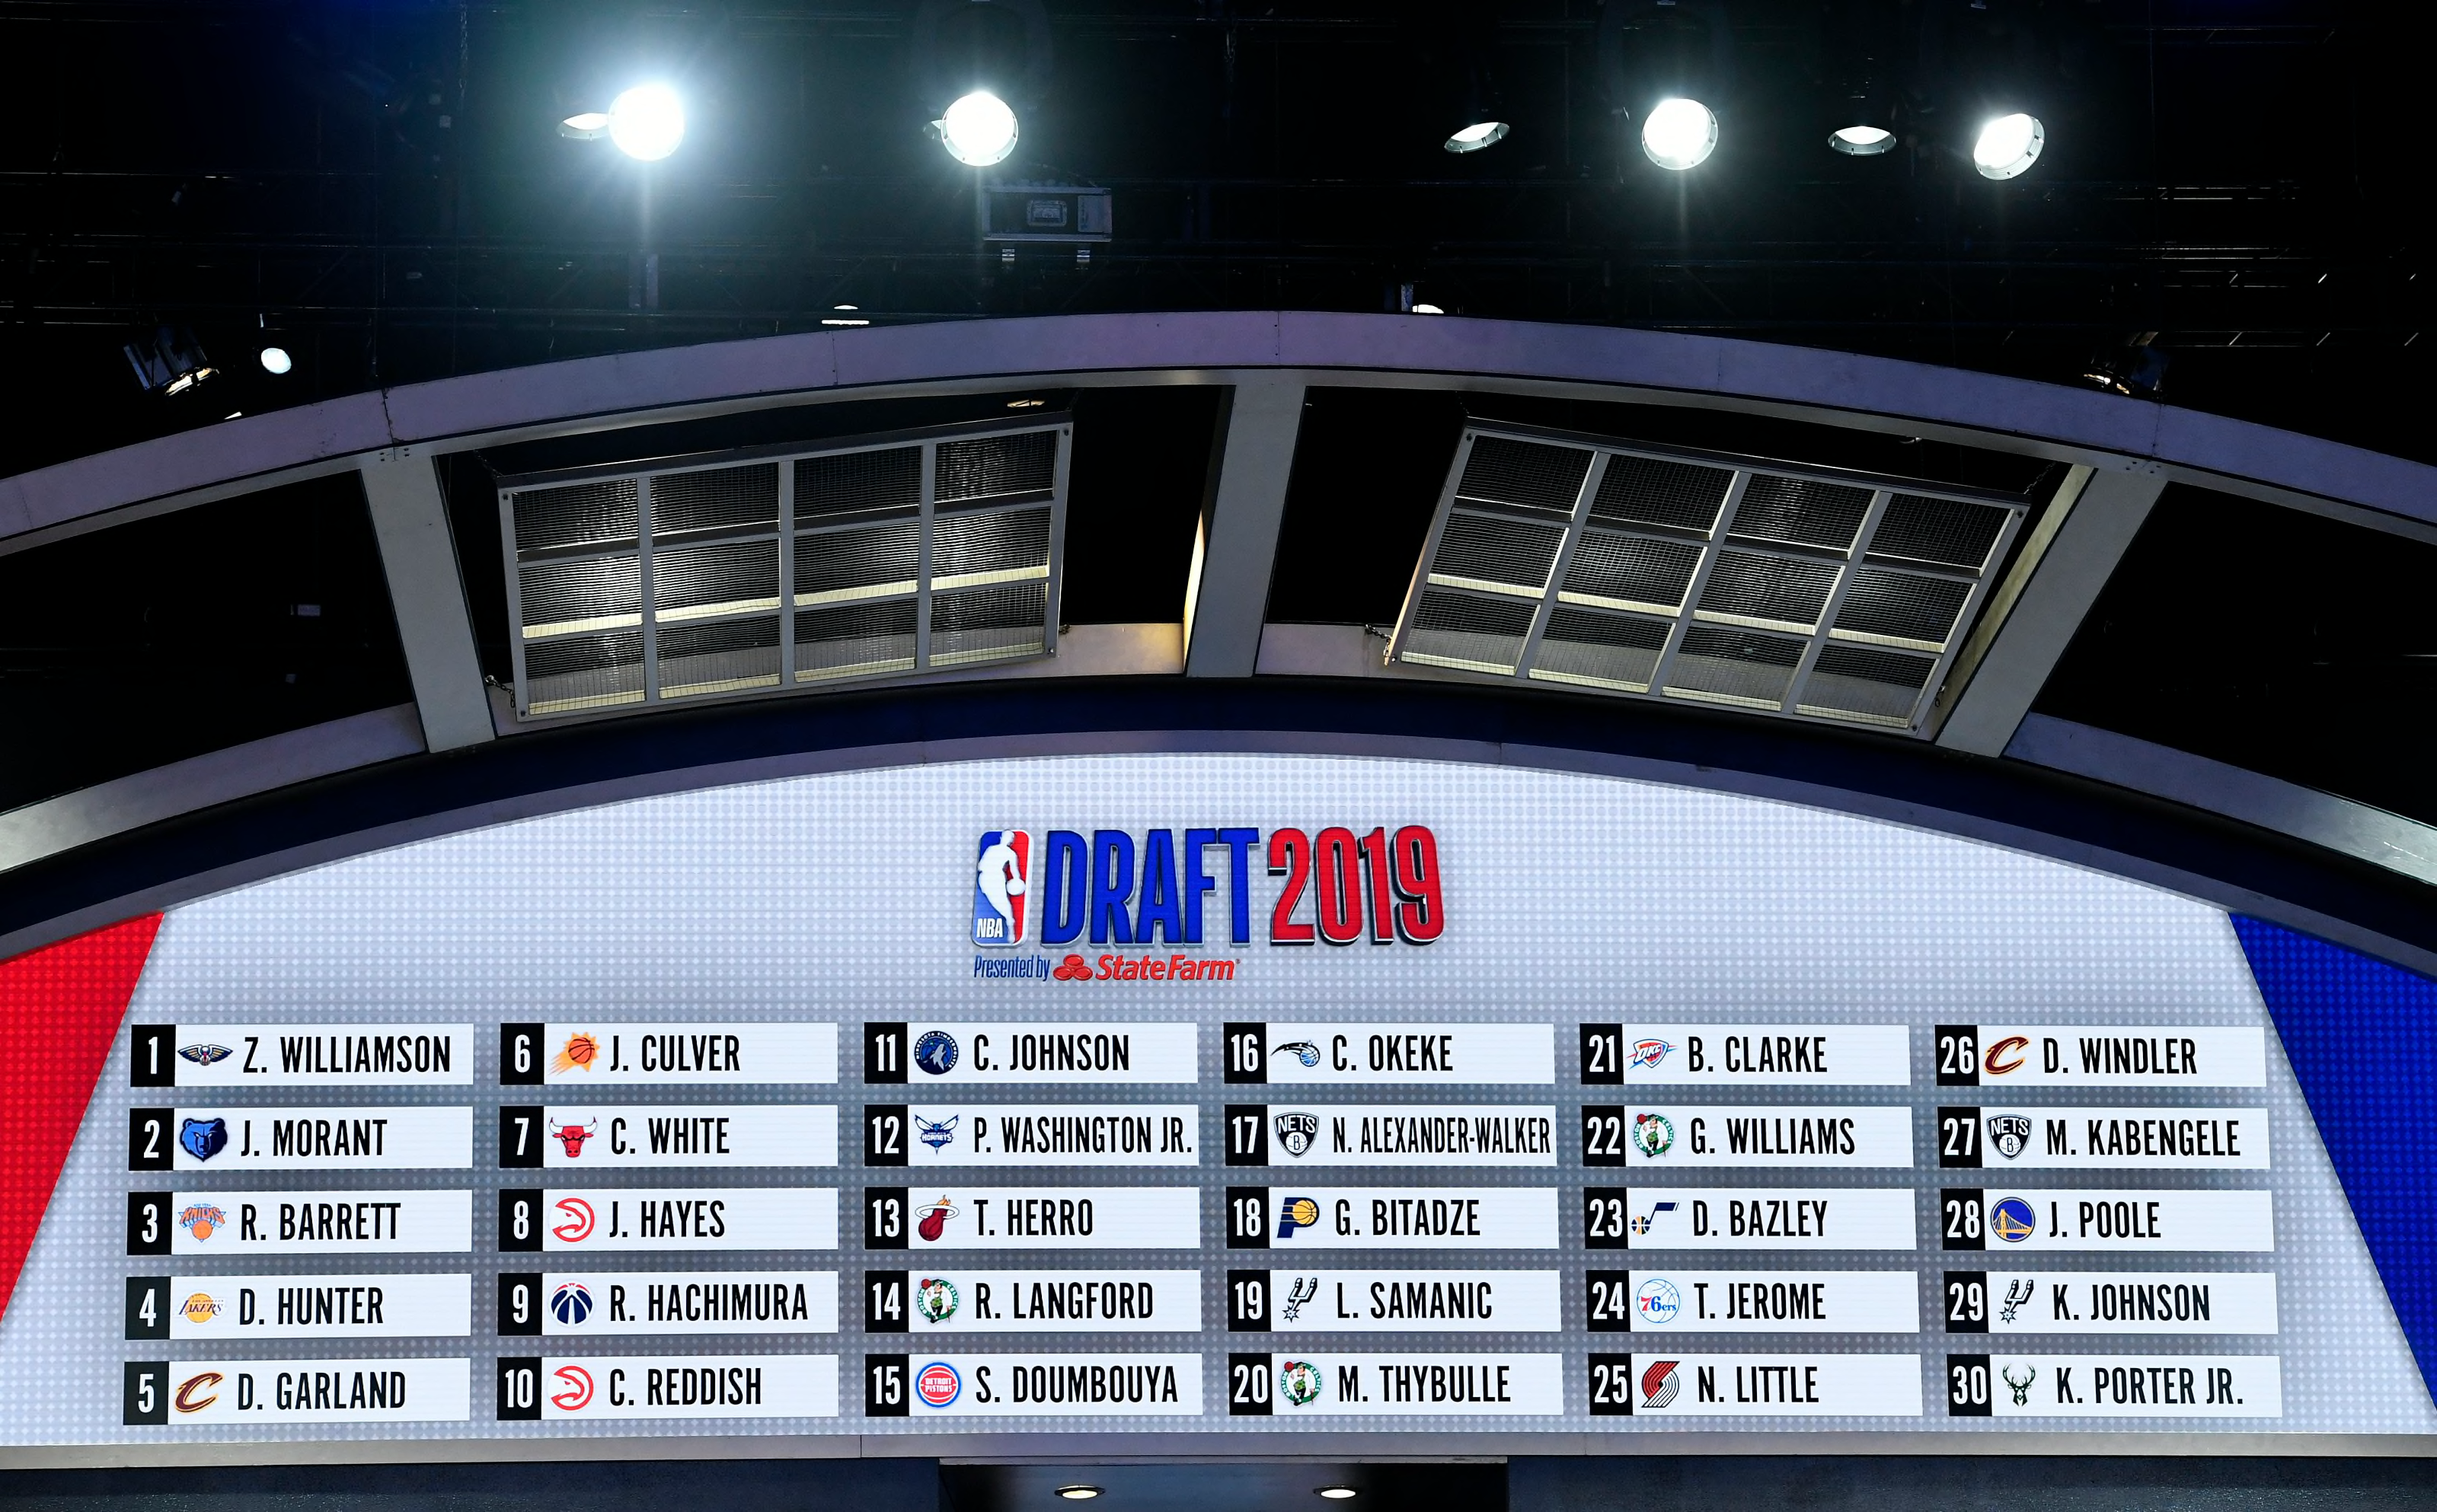 2019 Nba Draft Who Were The Top Value Picks In The Draft